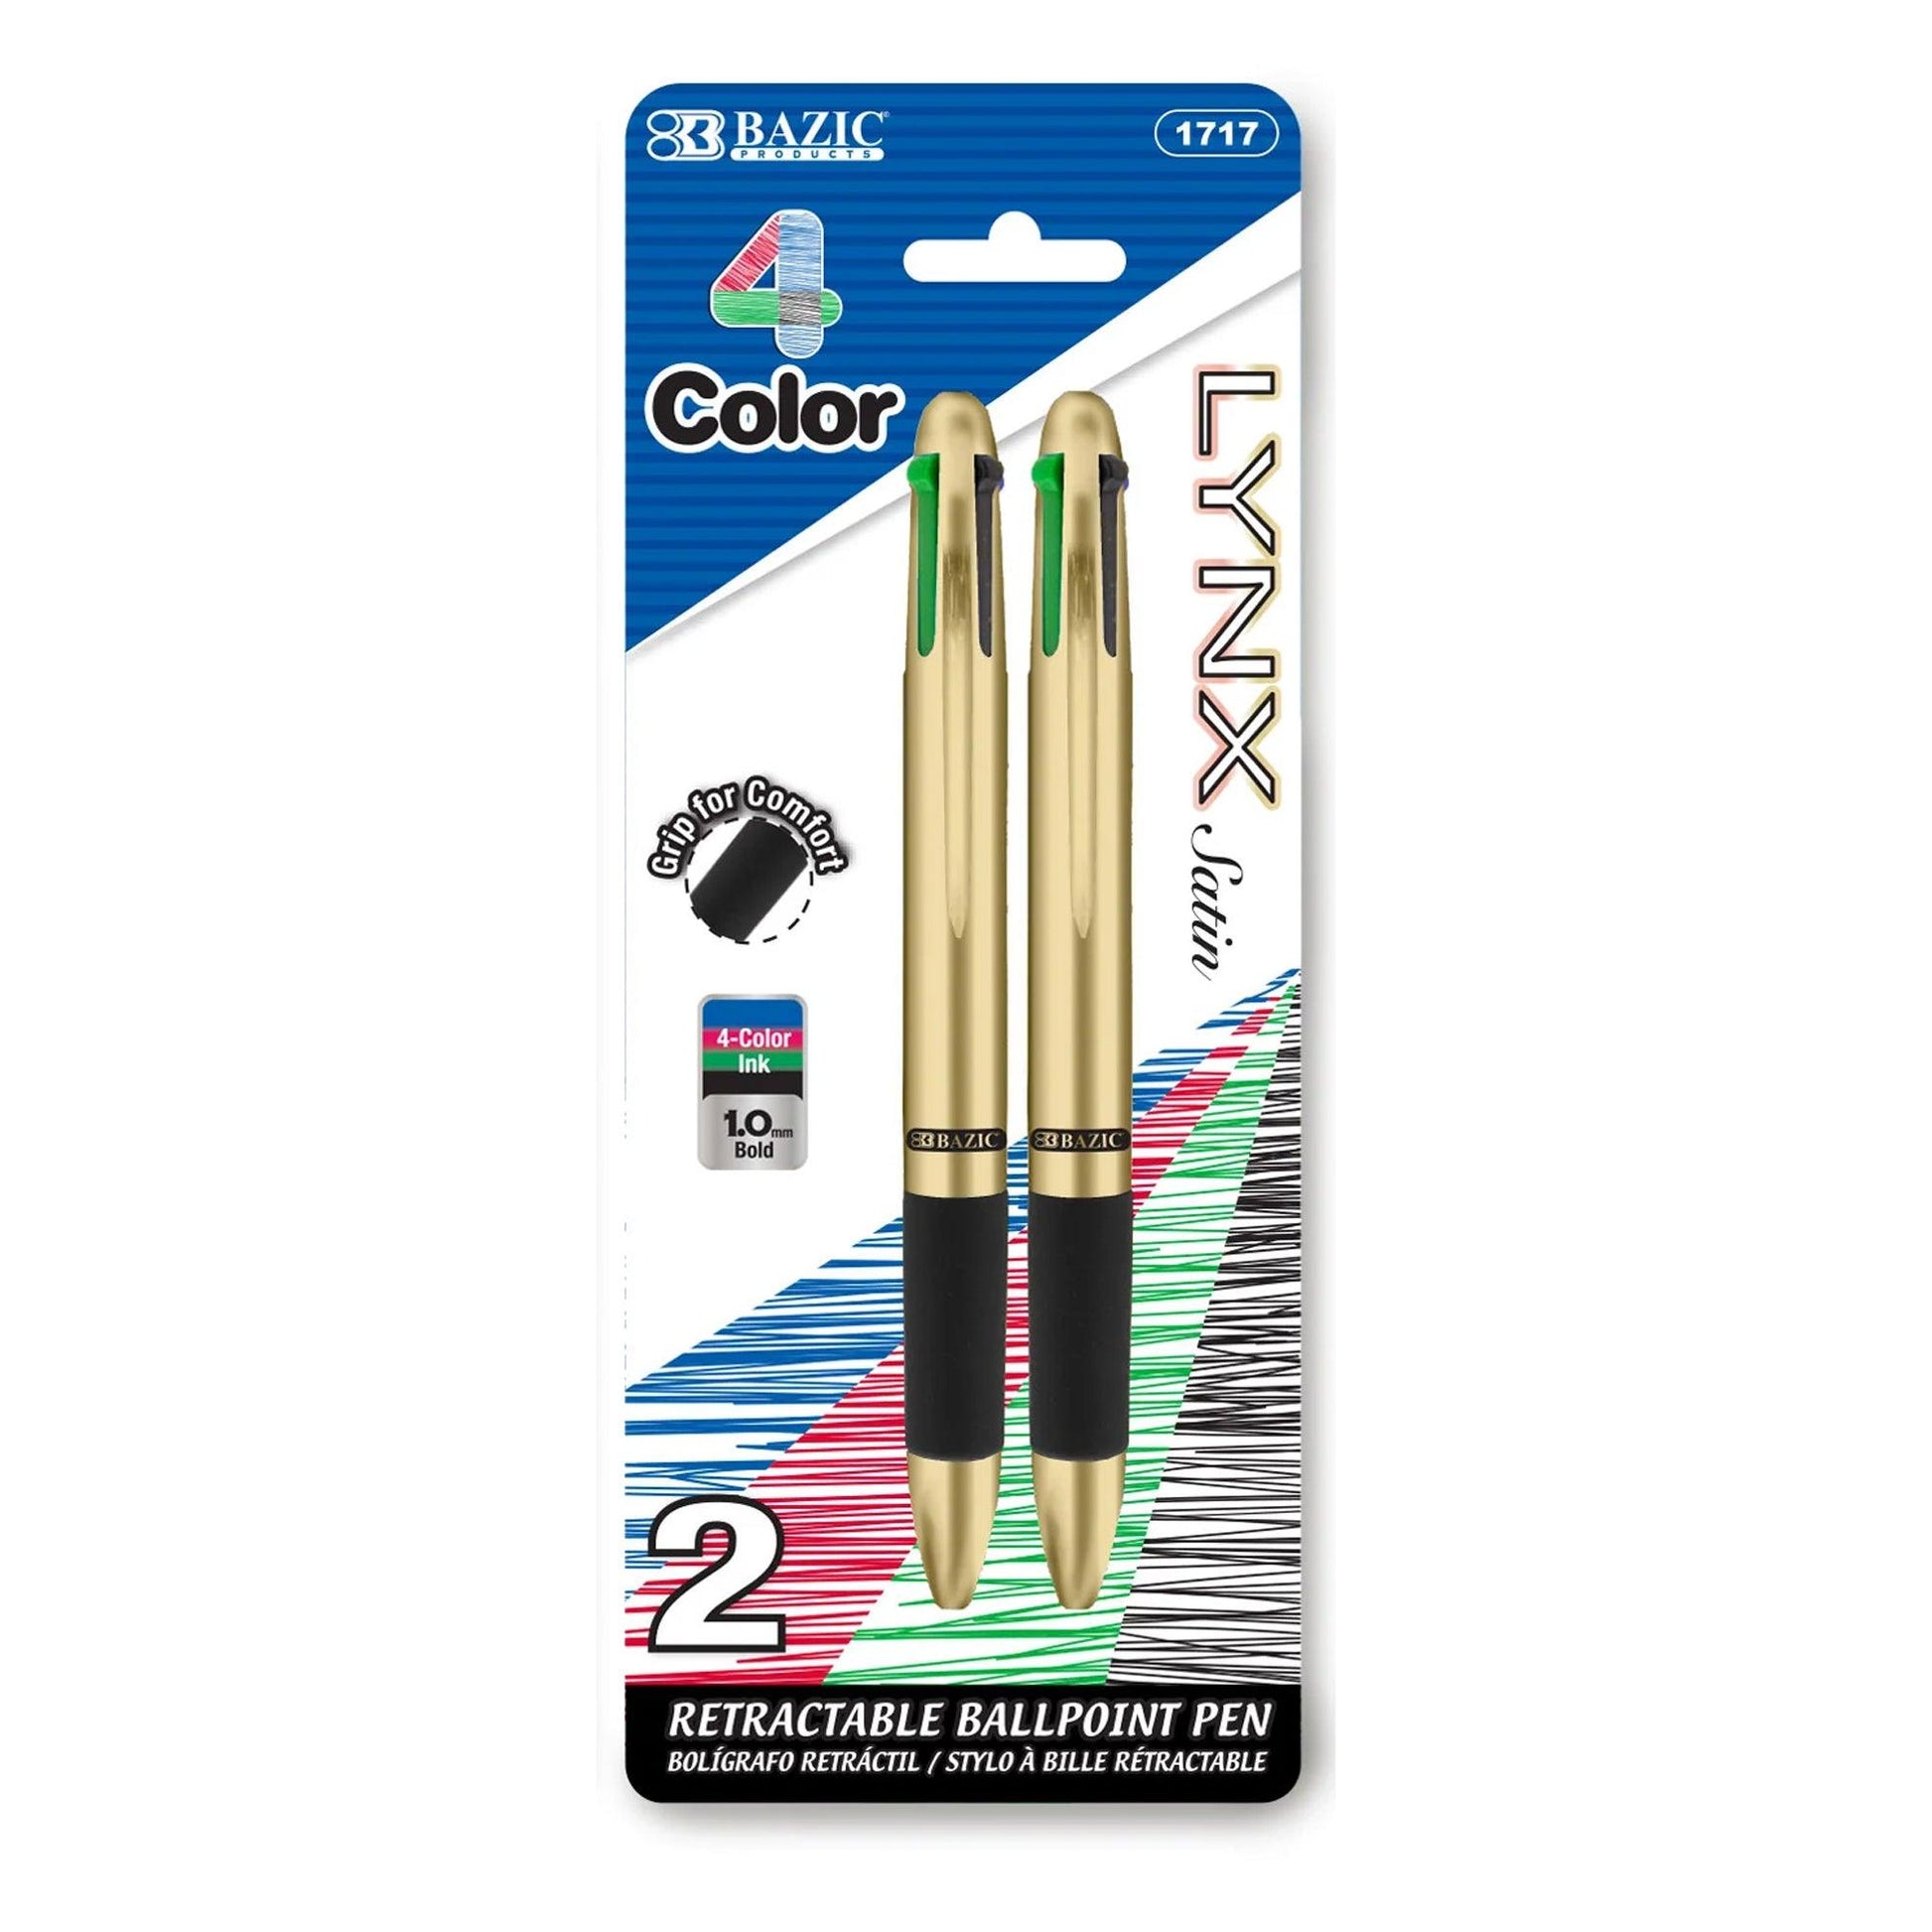 Lynx Satin Top 4-Color Pen with Cushion Grip, 2 Per Pack, 24 Packs - Loomini